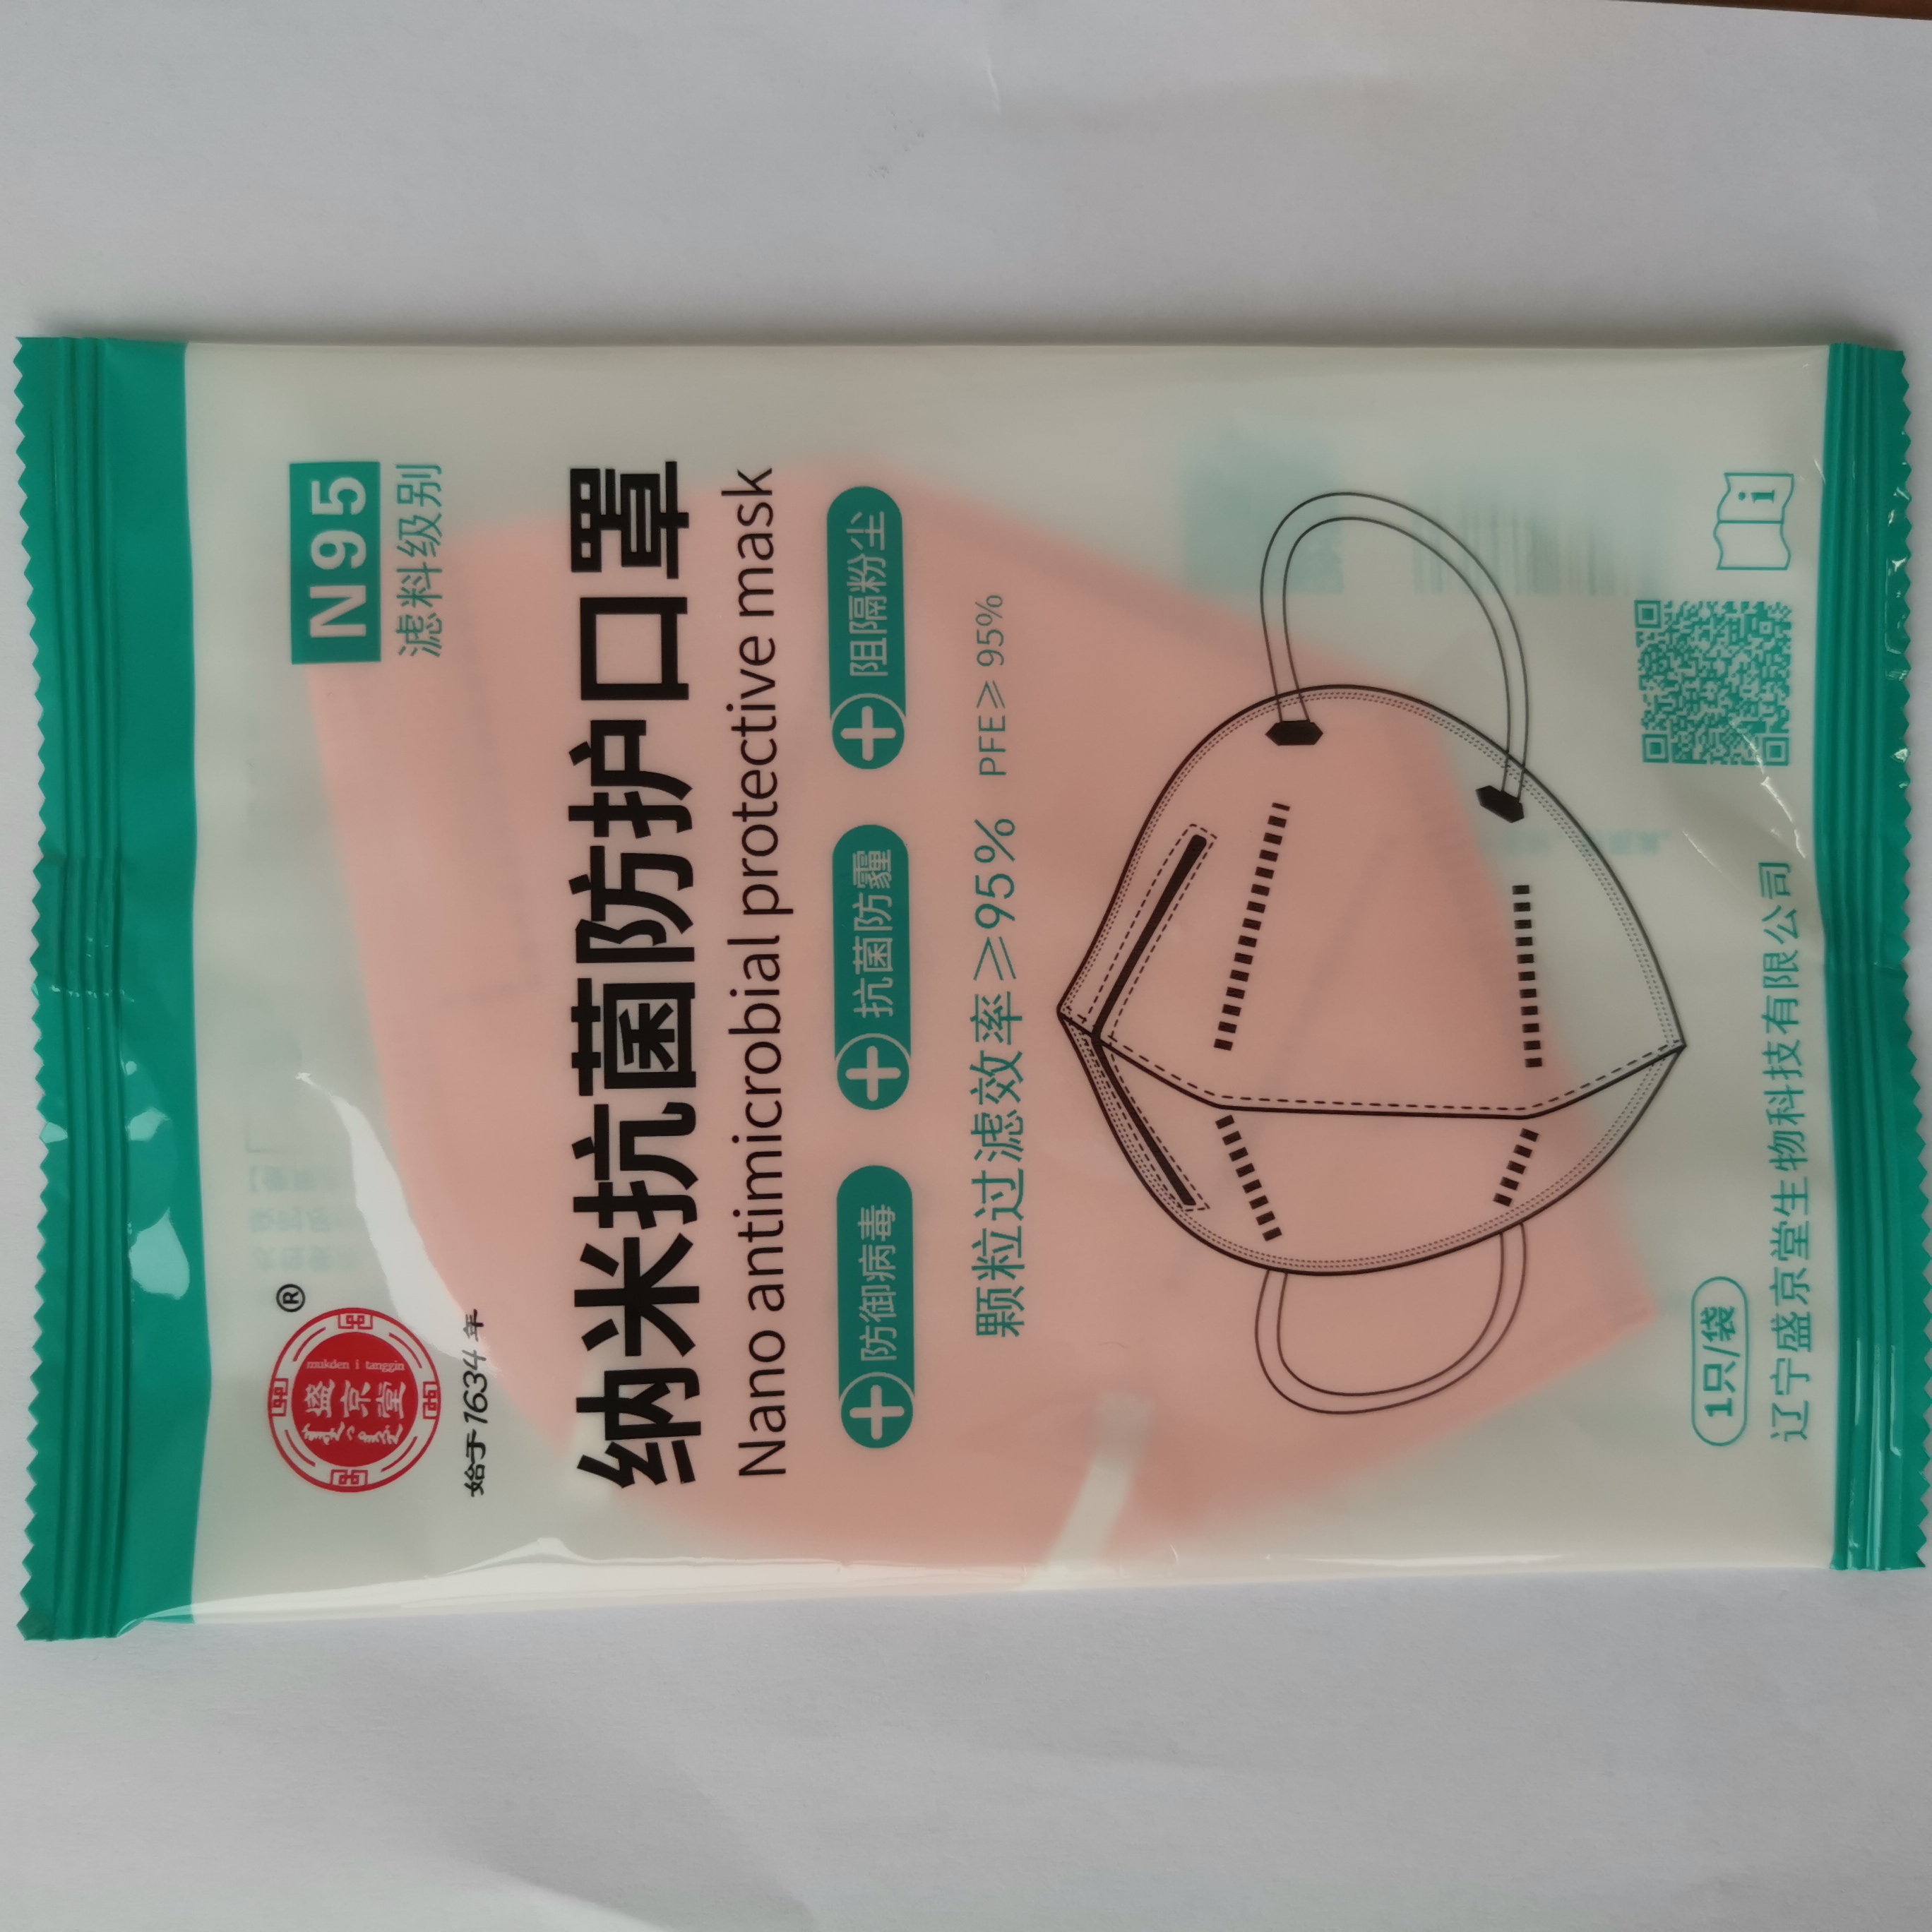 Disposable N95 Mask